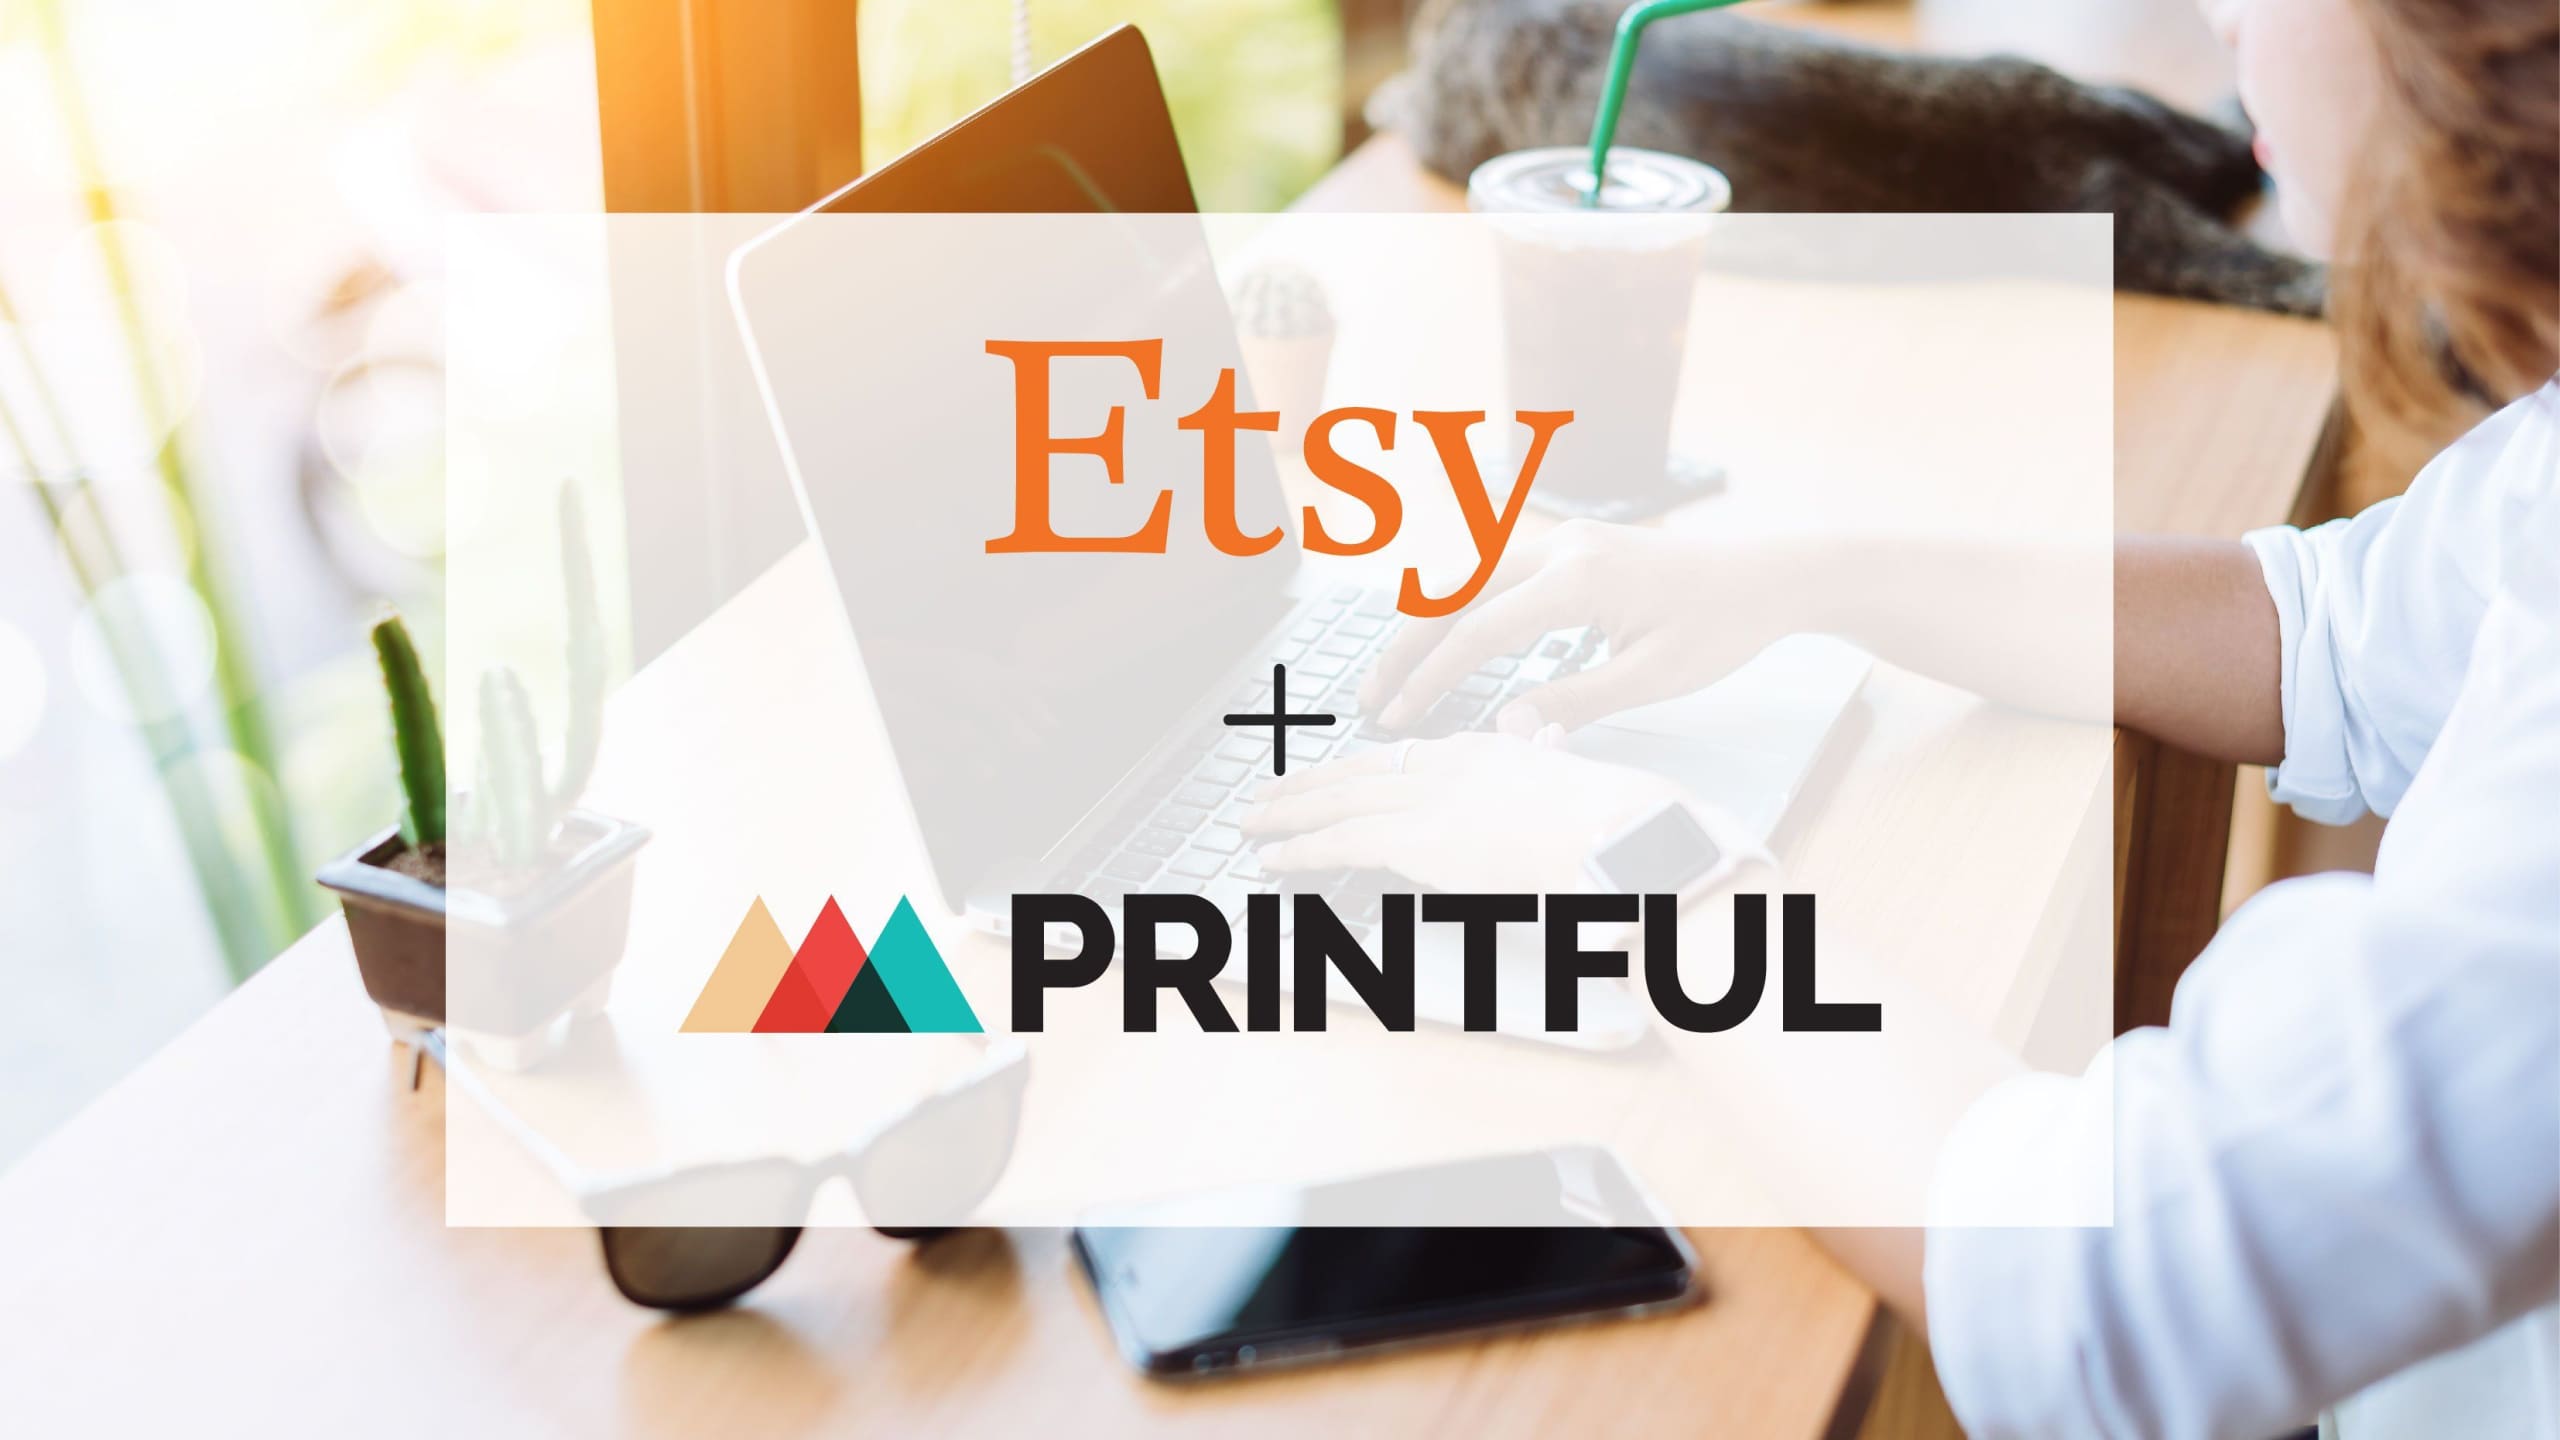 Etsy dropshipping with Printful